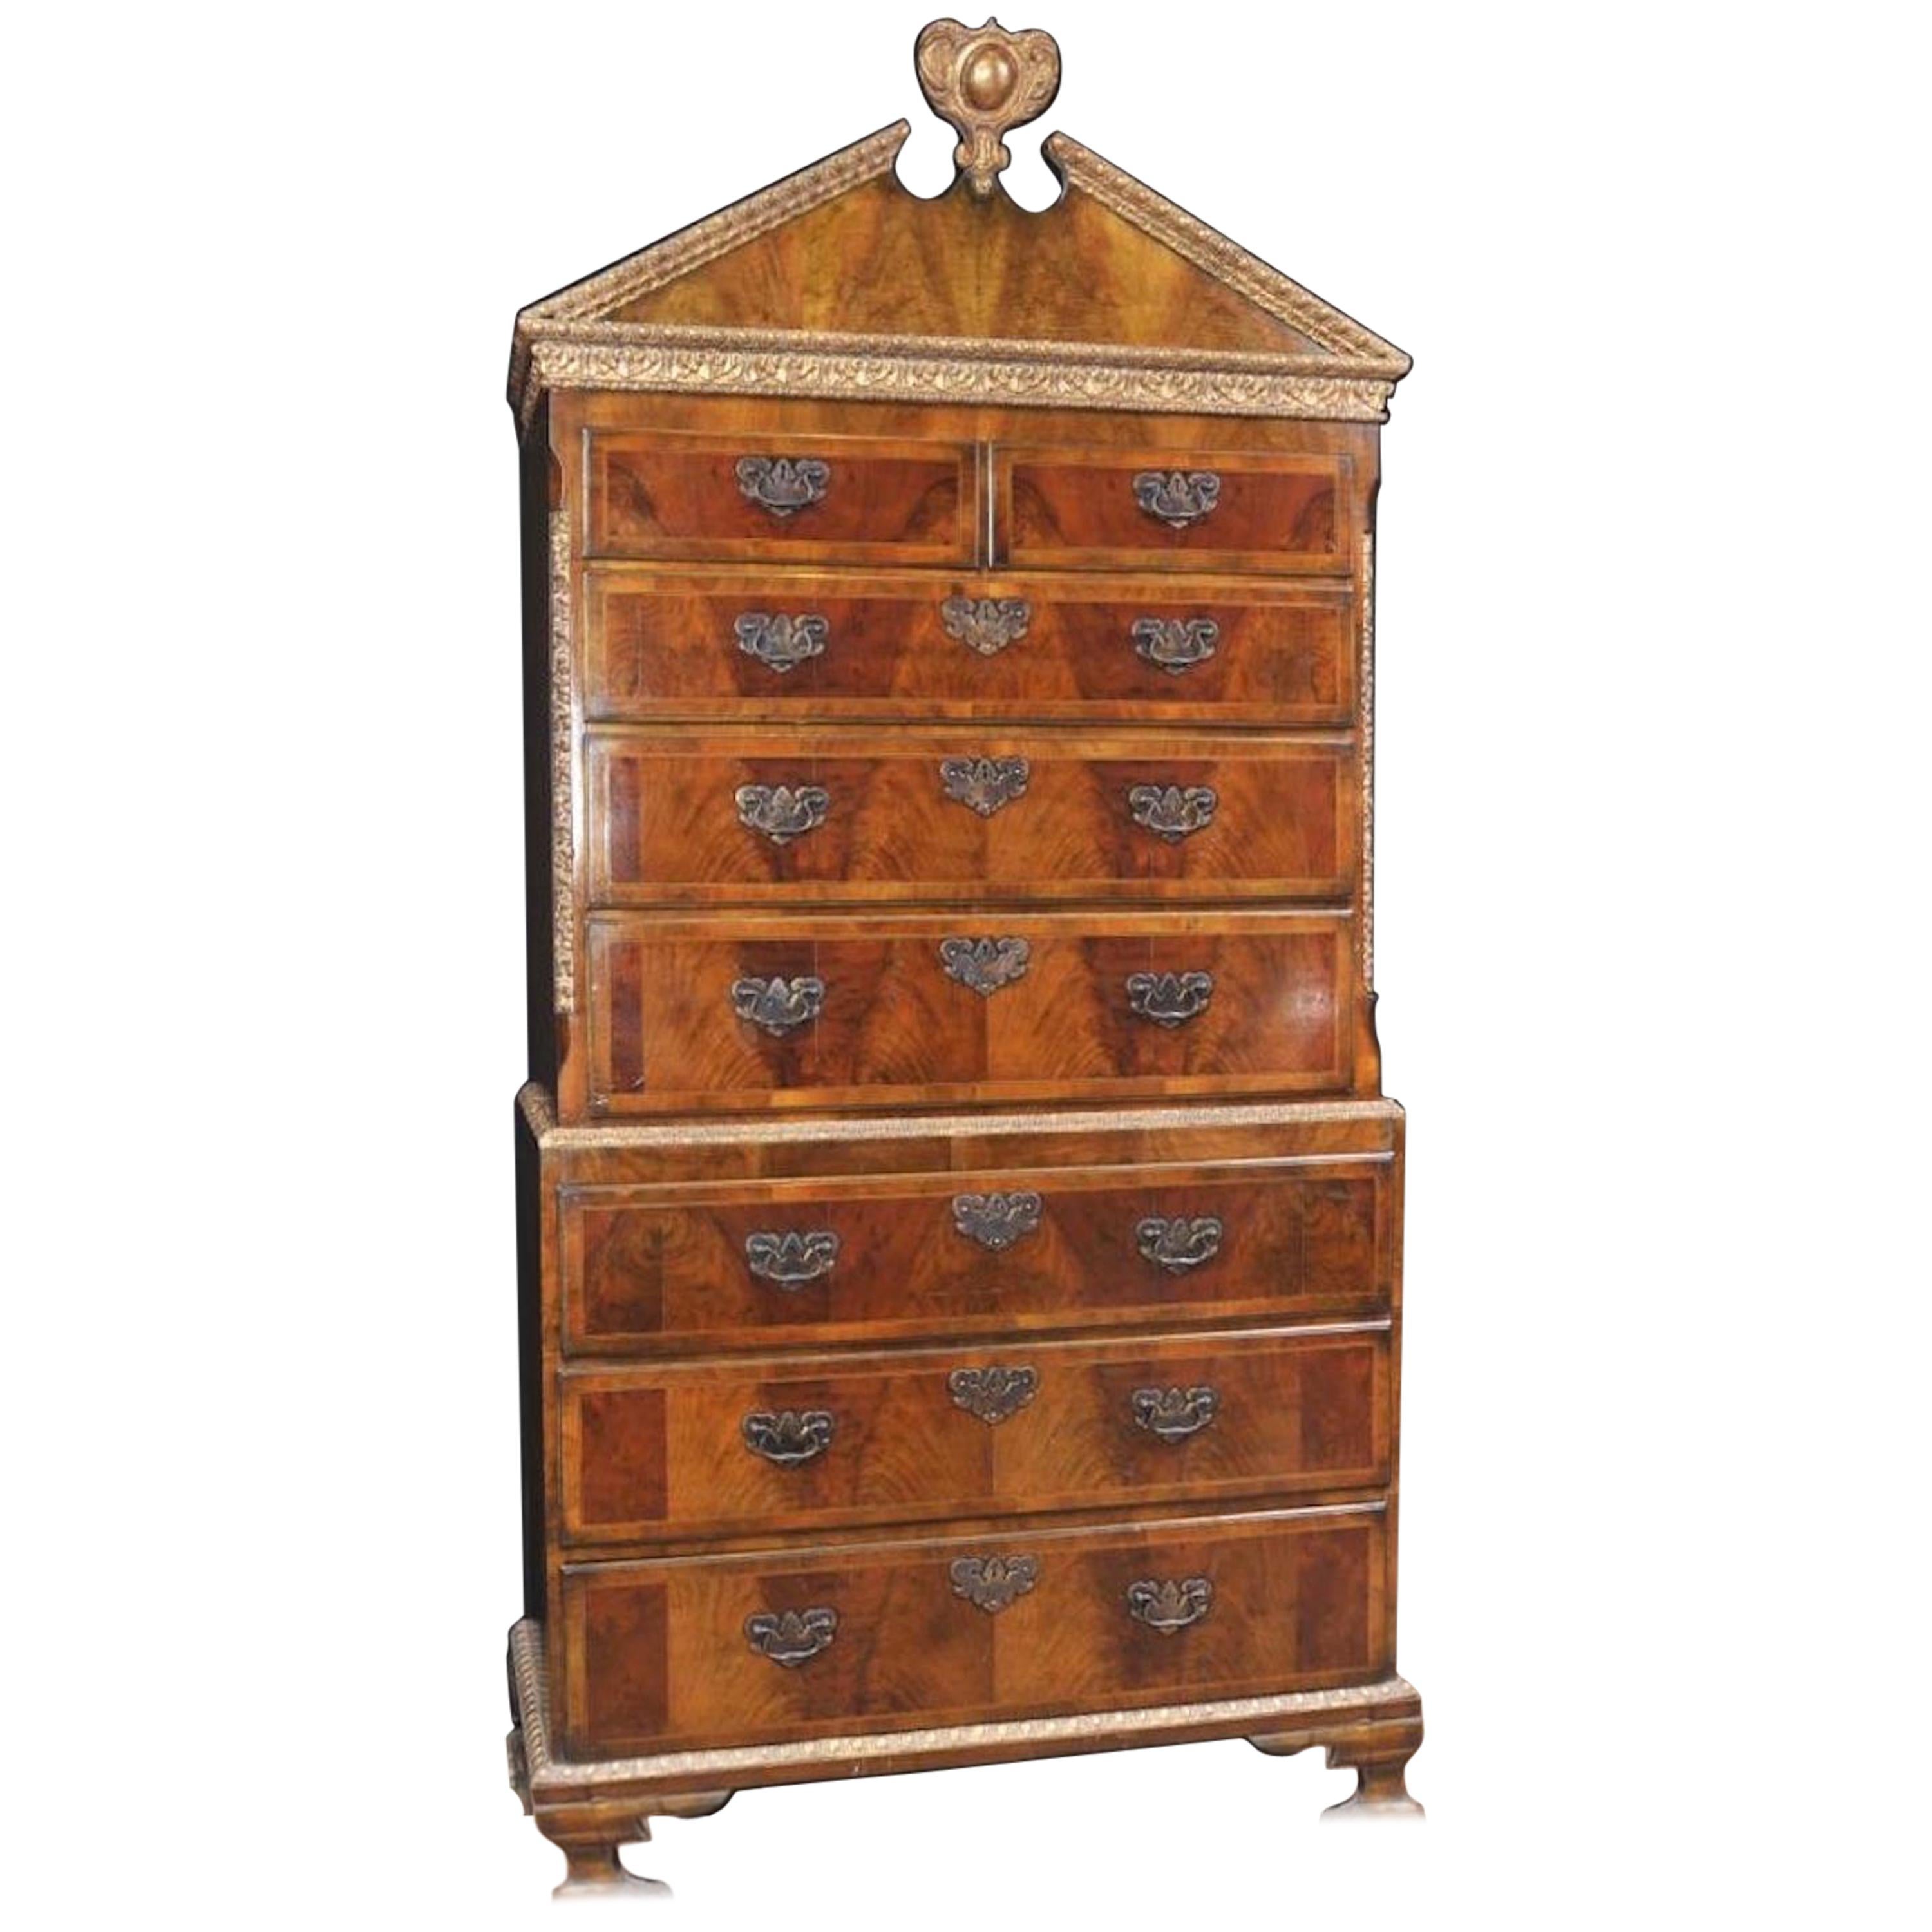 Impressive Sized English Burl Walnut Chest on Chest Dating to 1840 Standing For Sale